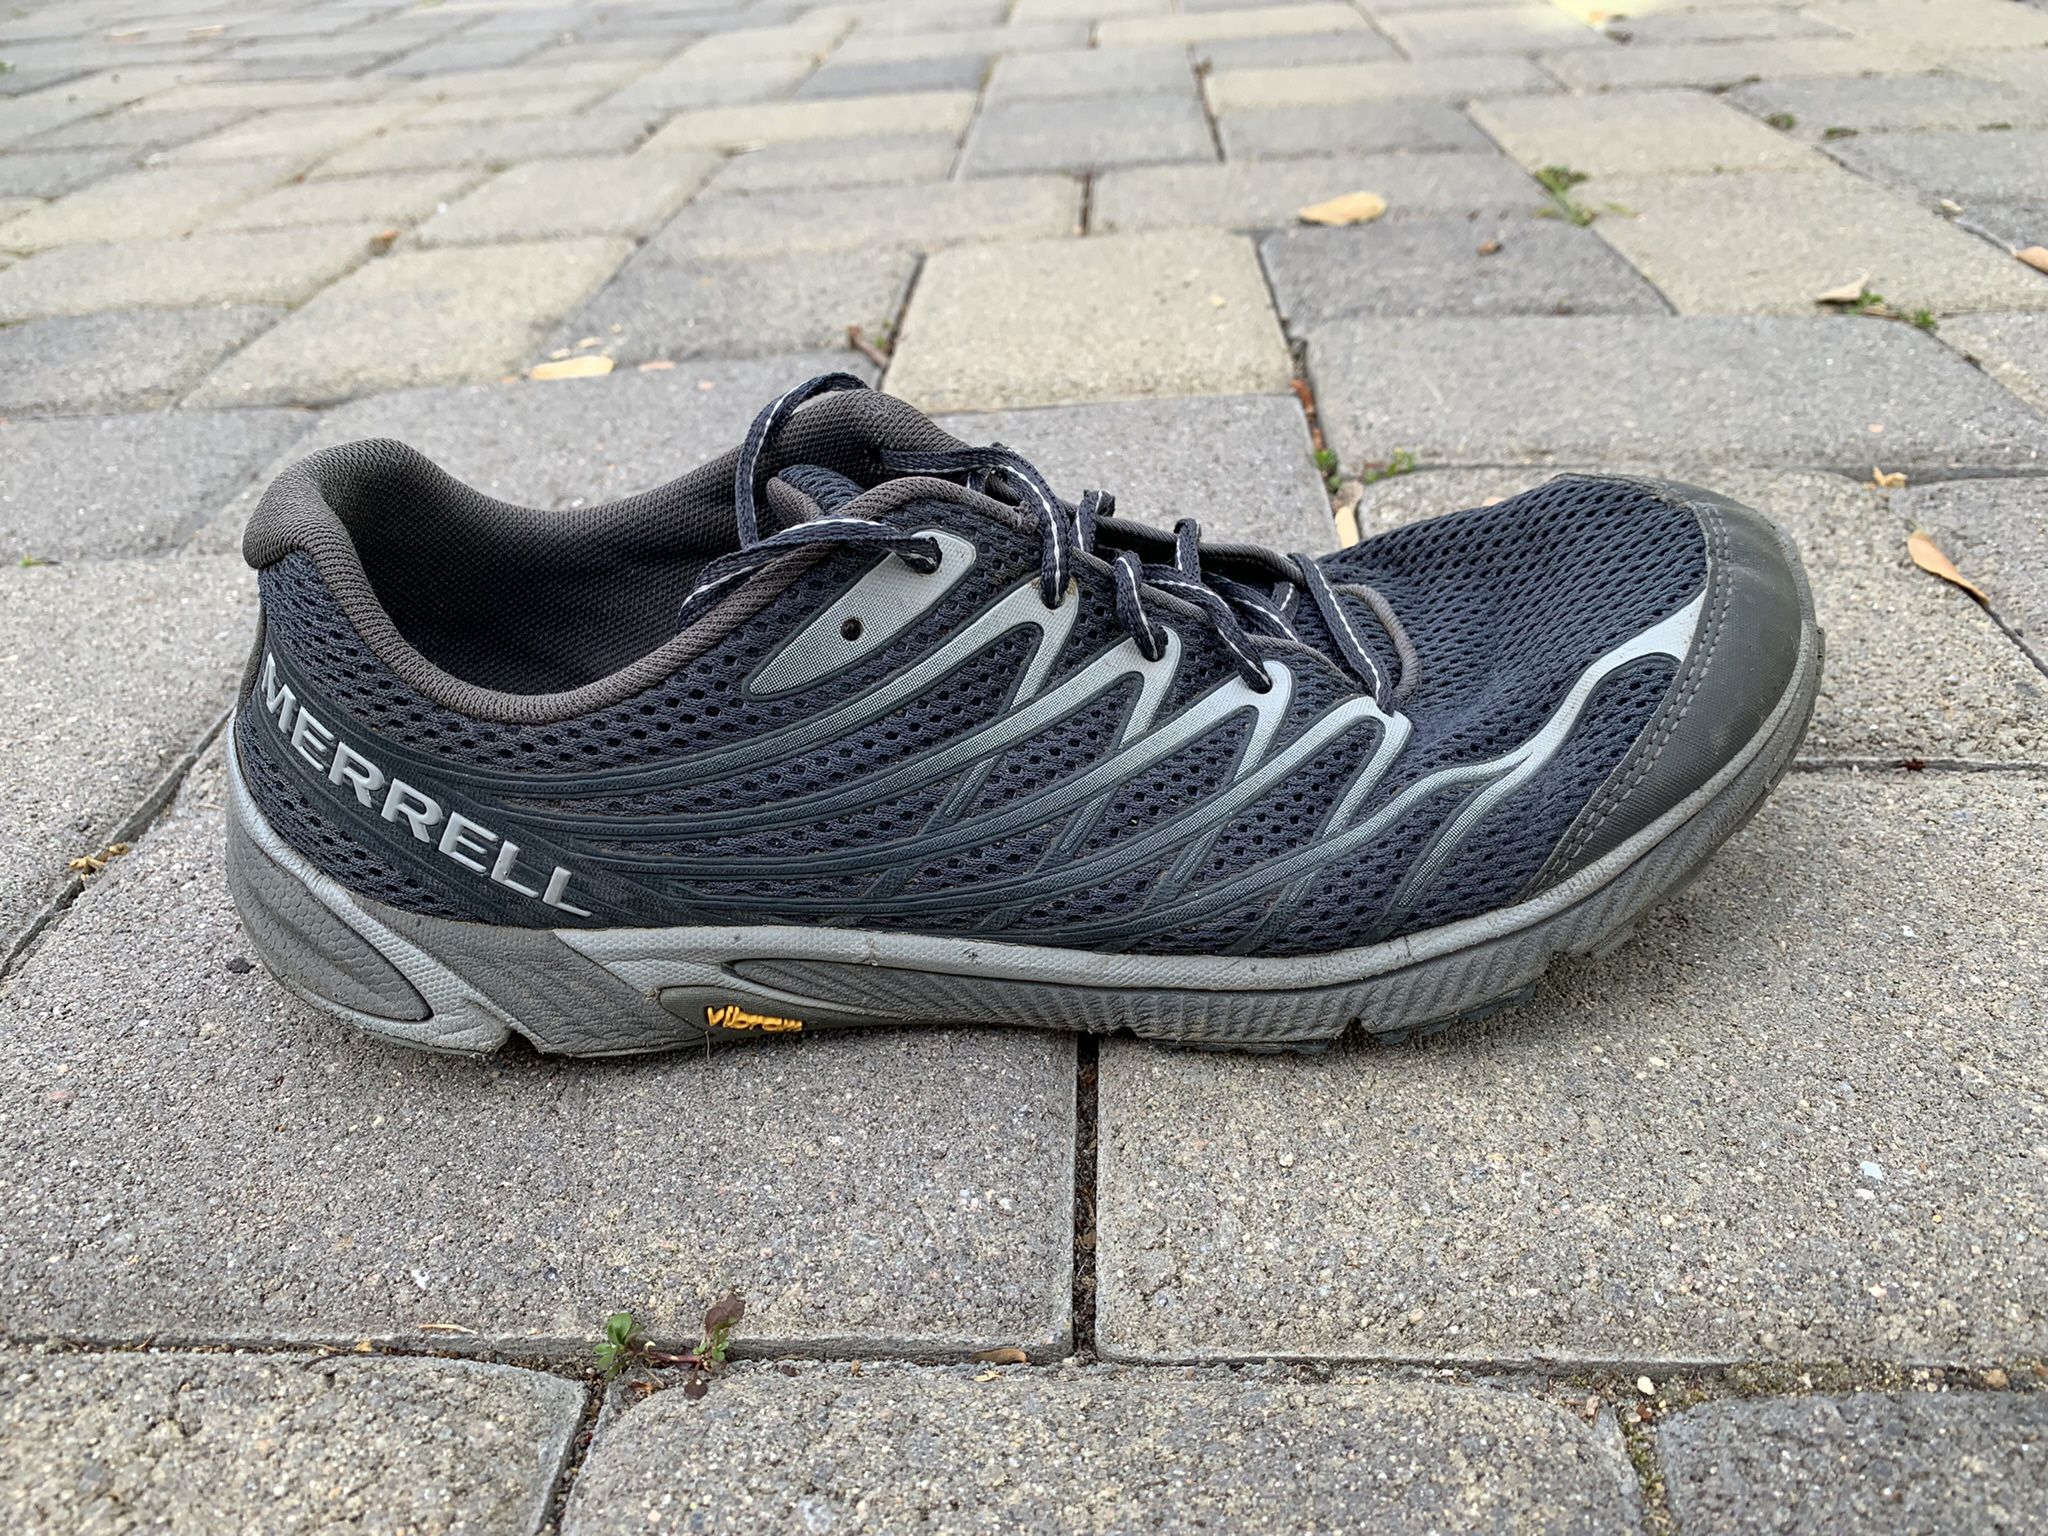 dal skam banjo Merrell trail running shoes for Sale in San Diego, CA - OfferUp